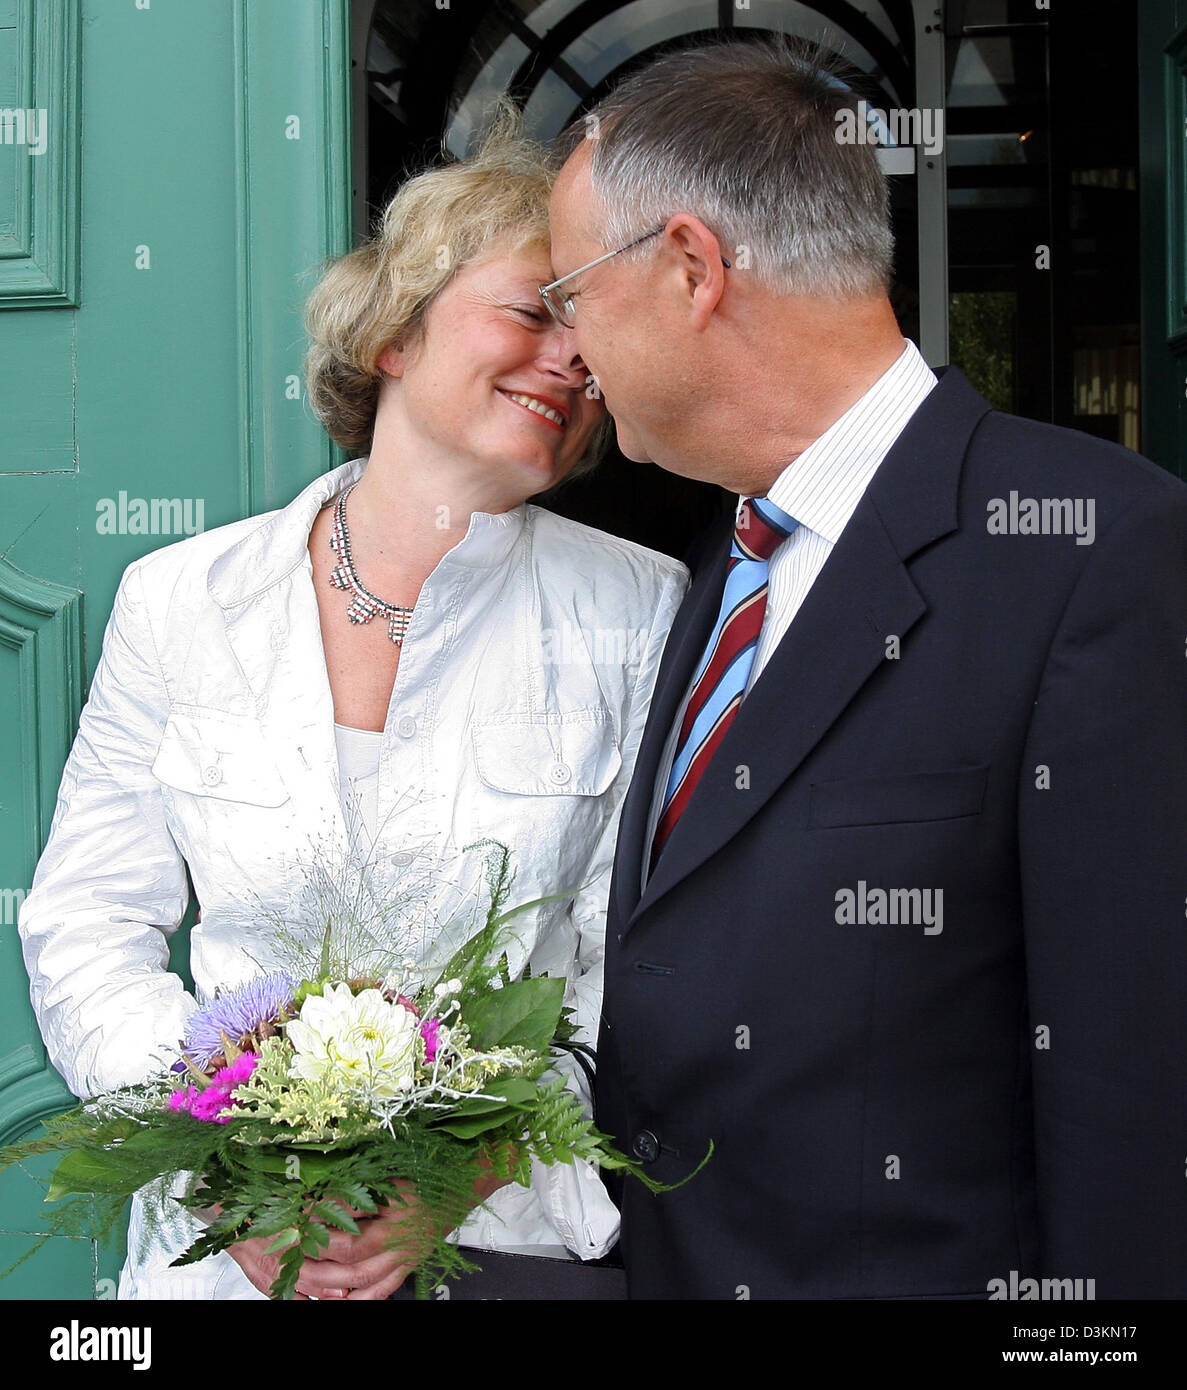 (dpa) - German Minister of Finance Hans Eichel (SPD) and his newly wed long-term girlfriend Gabriela Wolff (L) look at each other and smile after their wedding ceremony in Kassel, Germany, 27 July 2005. The short ceremony at the registrar's office took place amongst the closest family circle at Chateau Bellevue, witnesses said. It is the second marriage for 63-year old Eichel, form Stock Photo